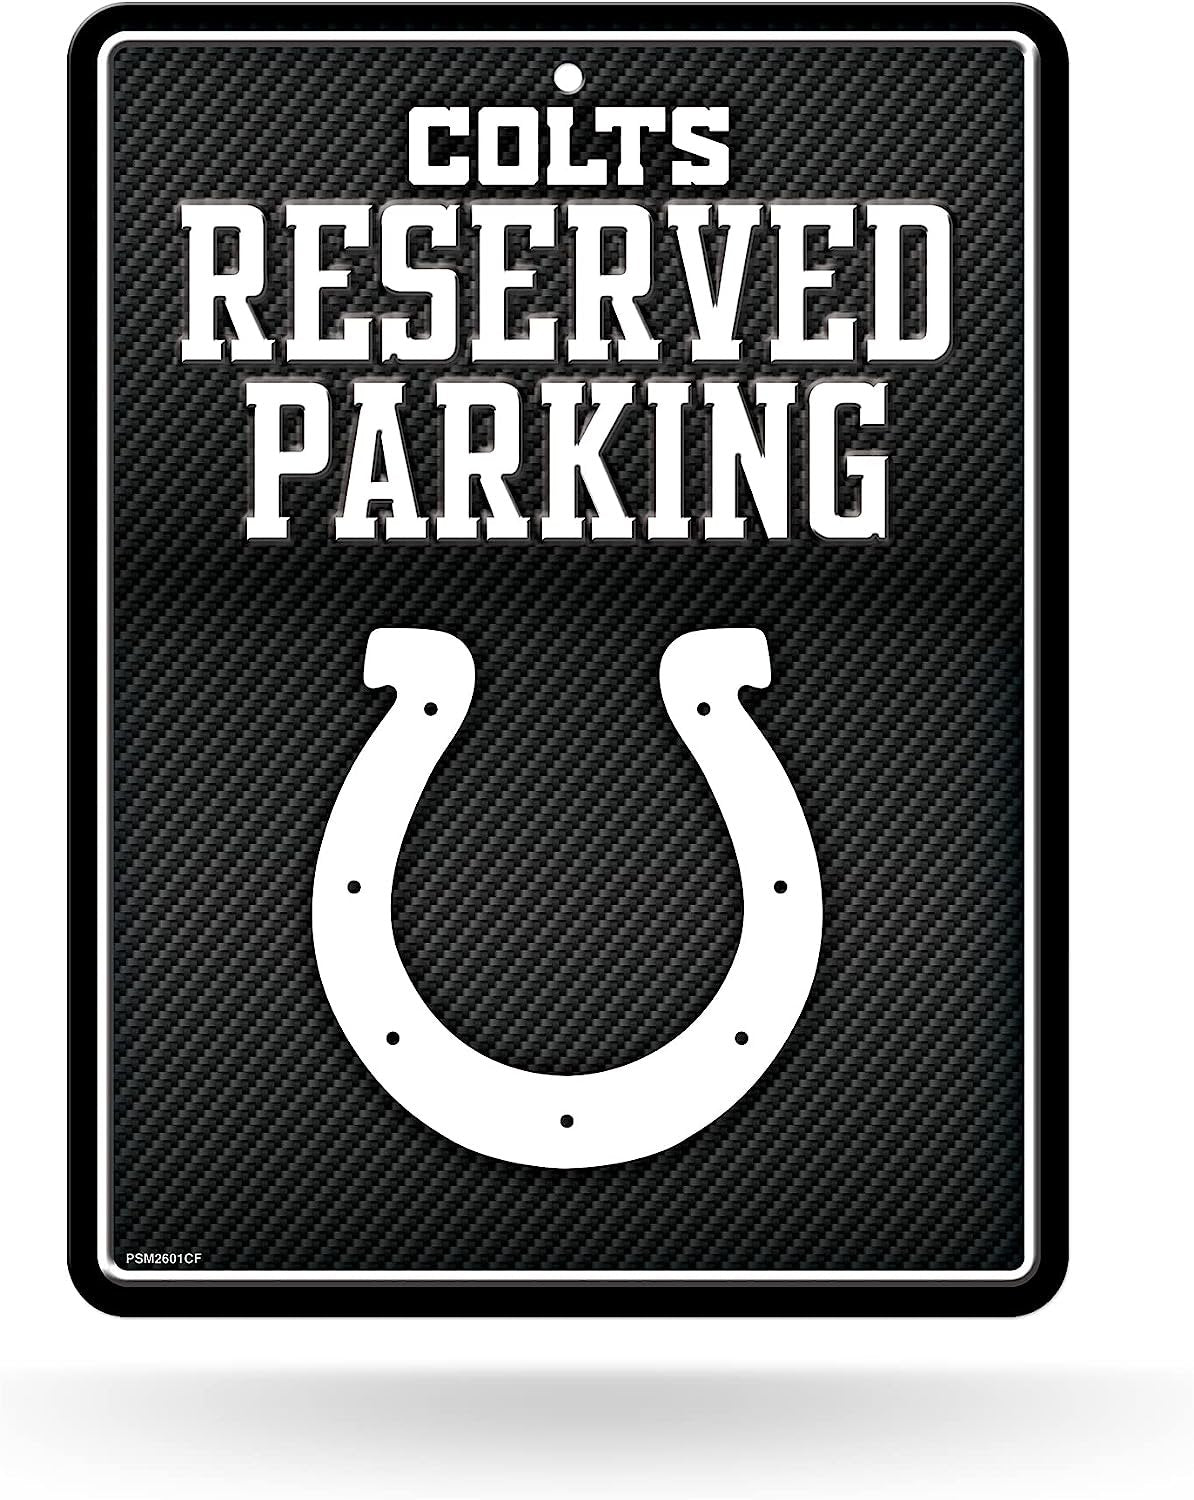 Indianapolis Colts Metal Parking Novelty Wall Sign 8.5 x 11 Inch Carbon Fiber Design